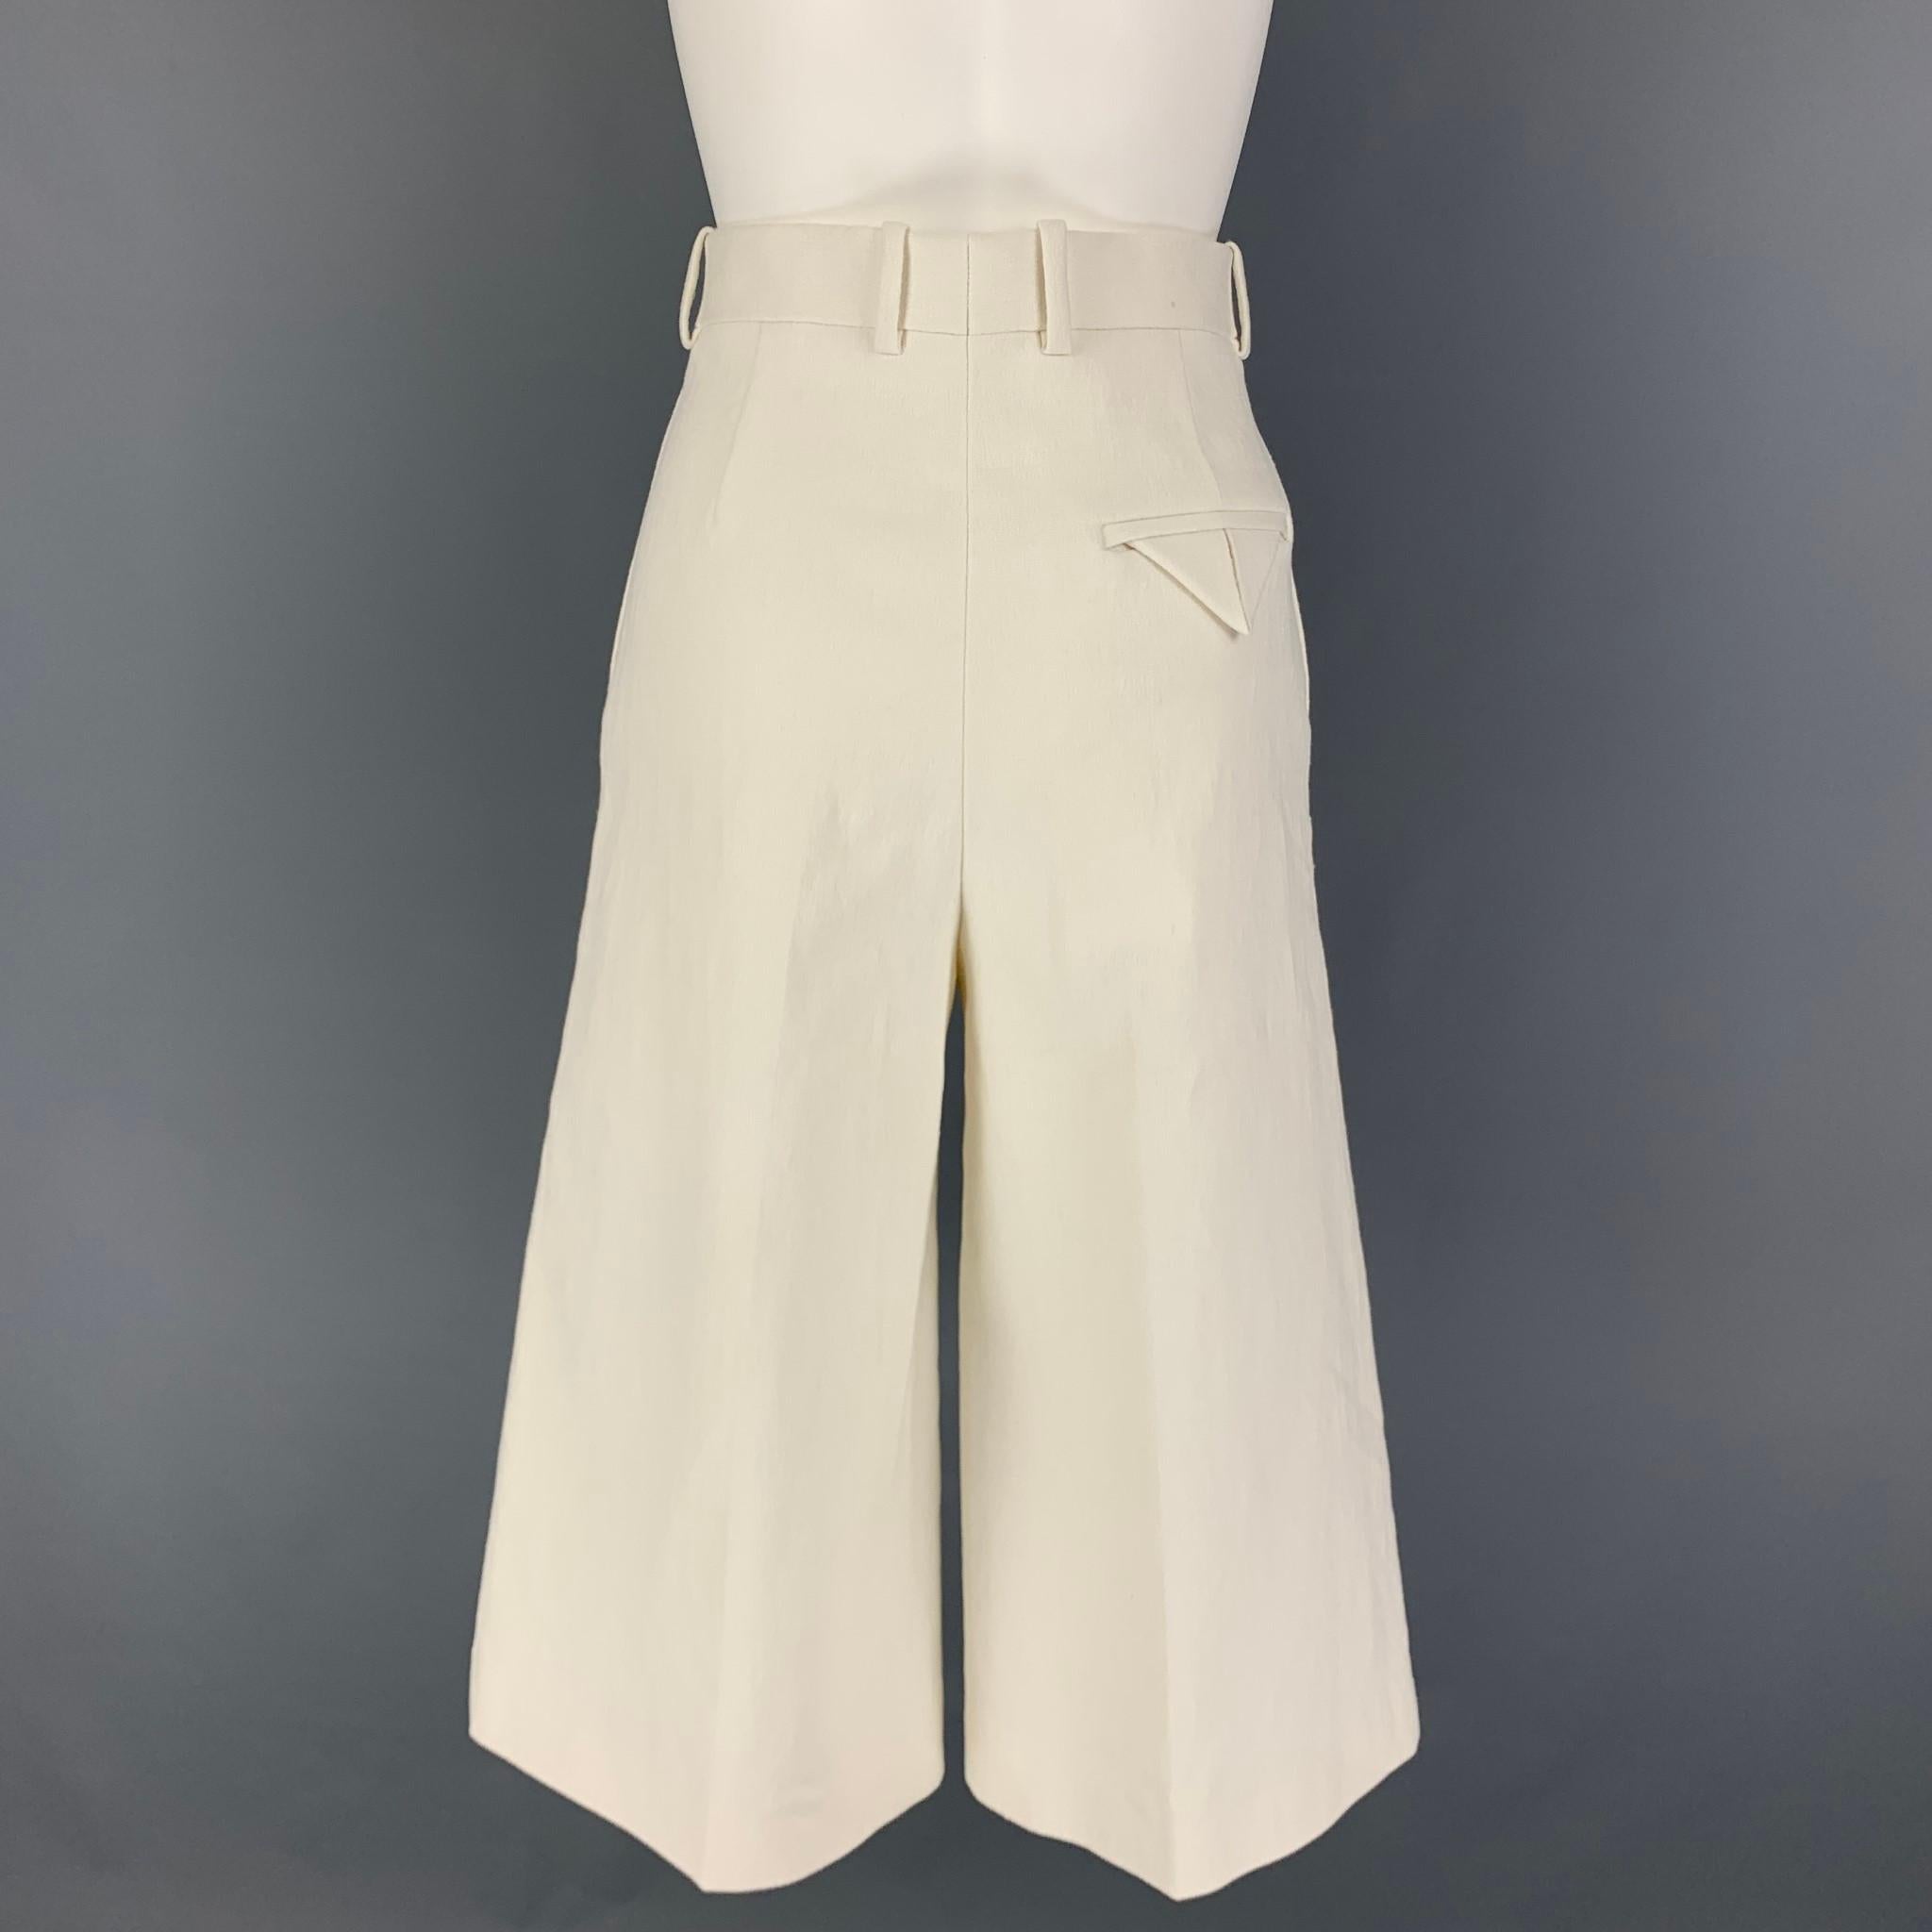 BOTTEGA VENETA pants comes in a cream wrinkled linen featuring a wide leg style, high waisted, front tab, and a zip fly closure. Made in Italy. 

Excellent Pre-Owned Condition.
Marked: 38
Original Retail Price: $1,135.00

Measurements:

Waist: 30